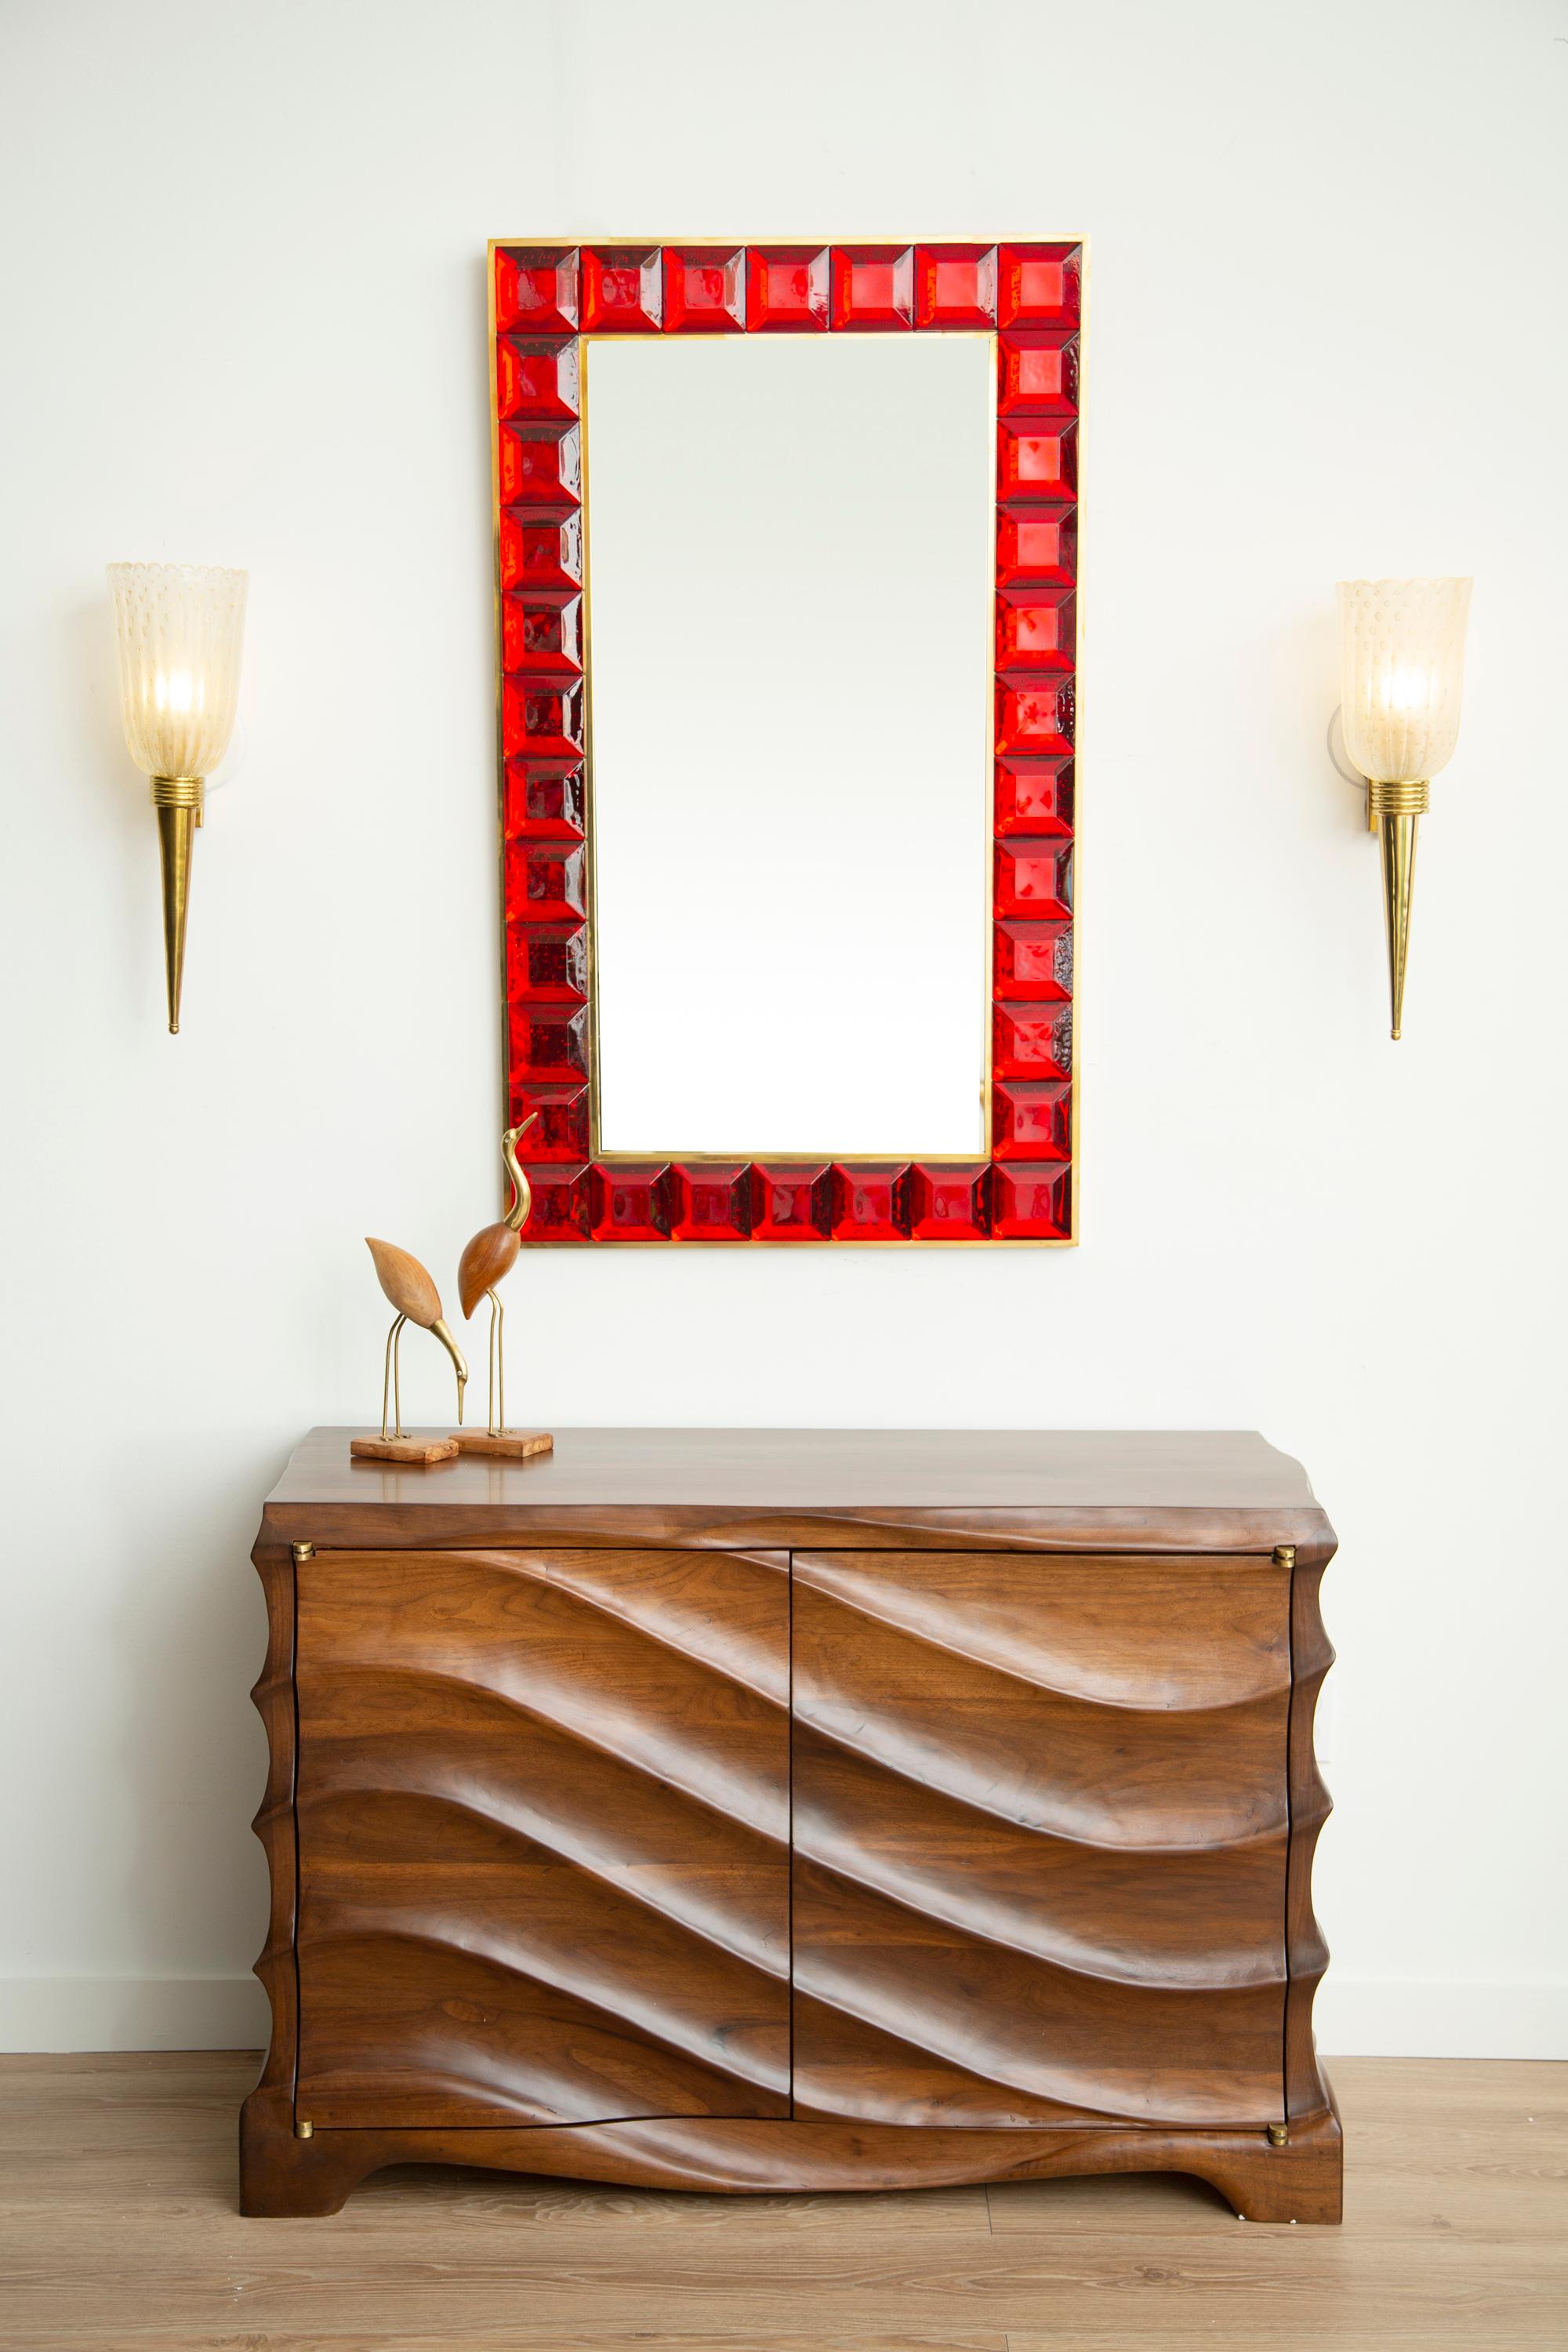 Contemporary ruby red square diamond cut Murano glass mirror (2 available), in stock
Vivid and intense ruby red glass block with naturally occurring air inclusions throughout 
 Highly polished faceted pattern
 Brass gallery
 Luxury handcrafted by a